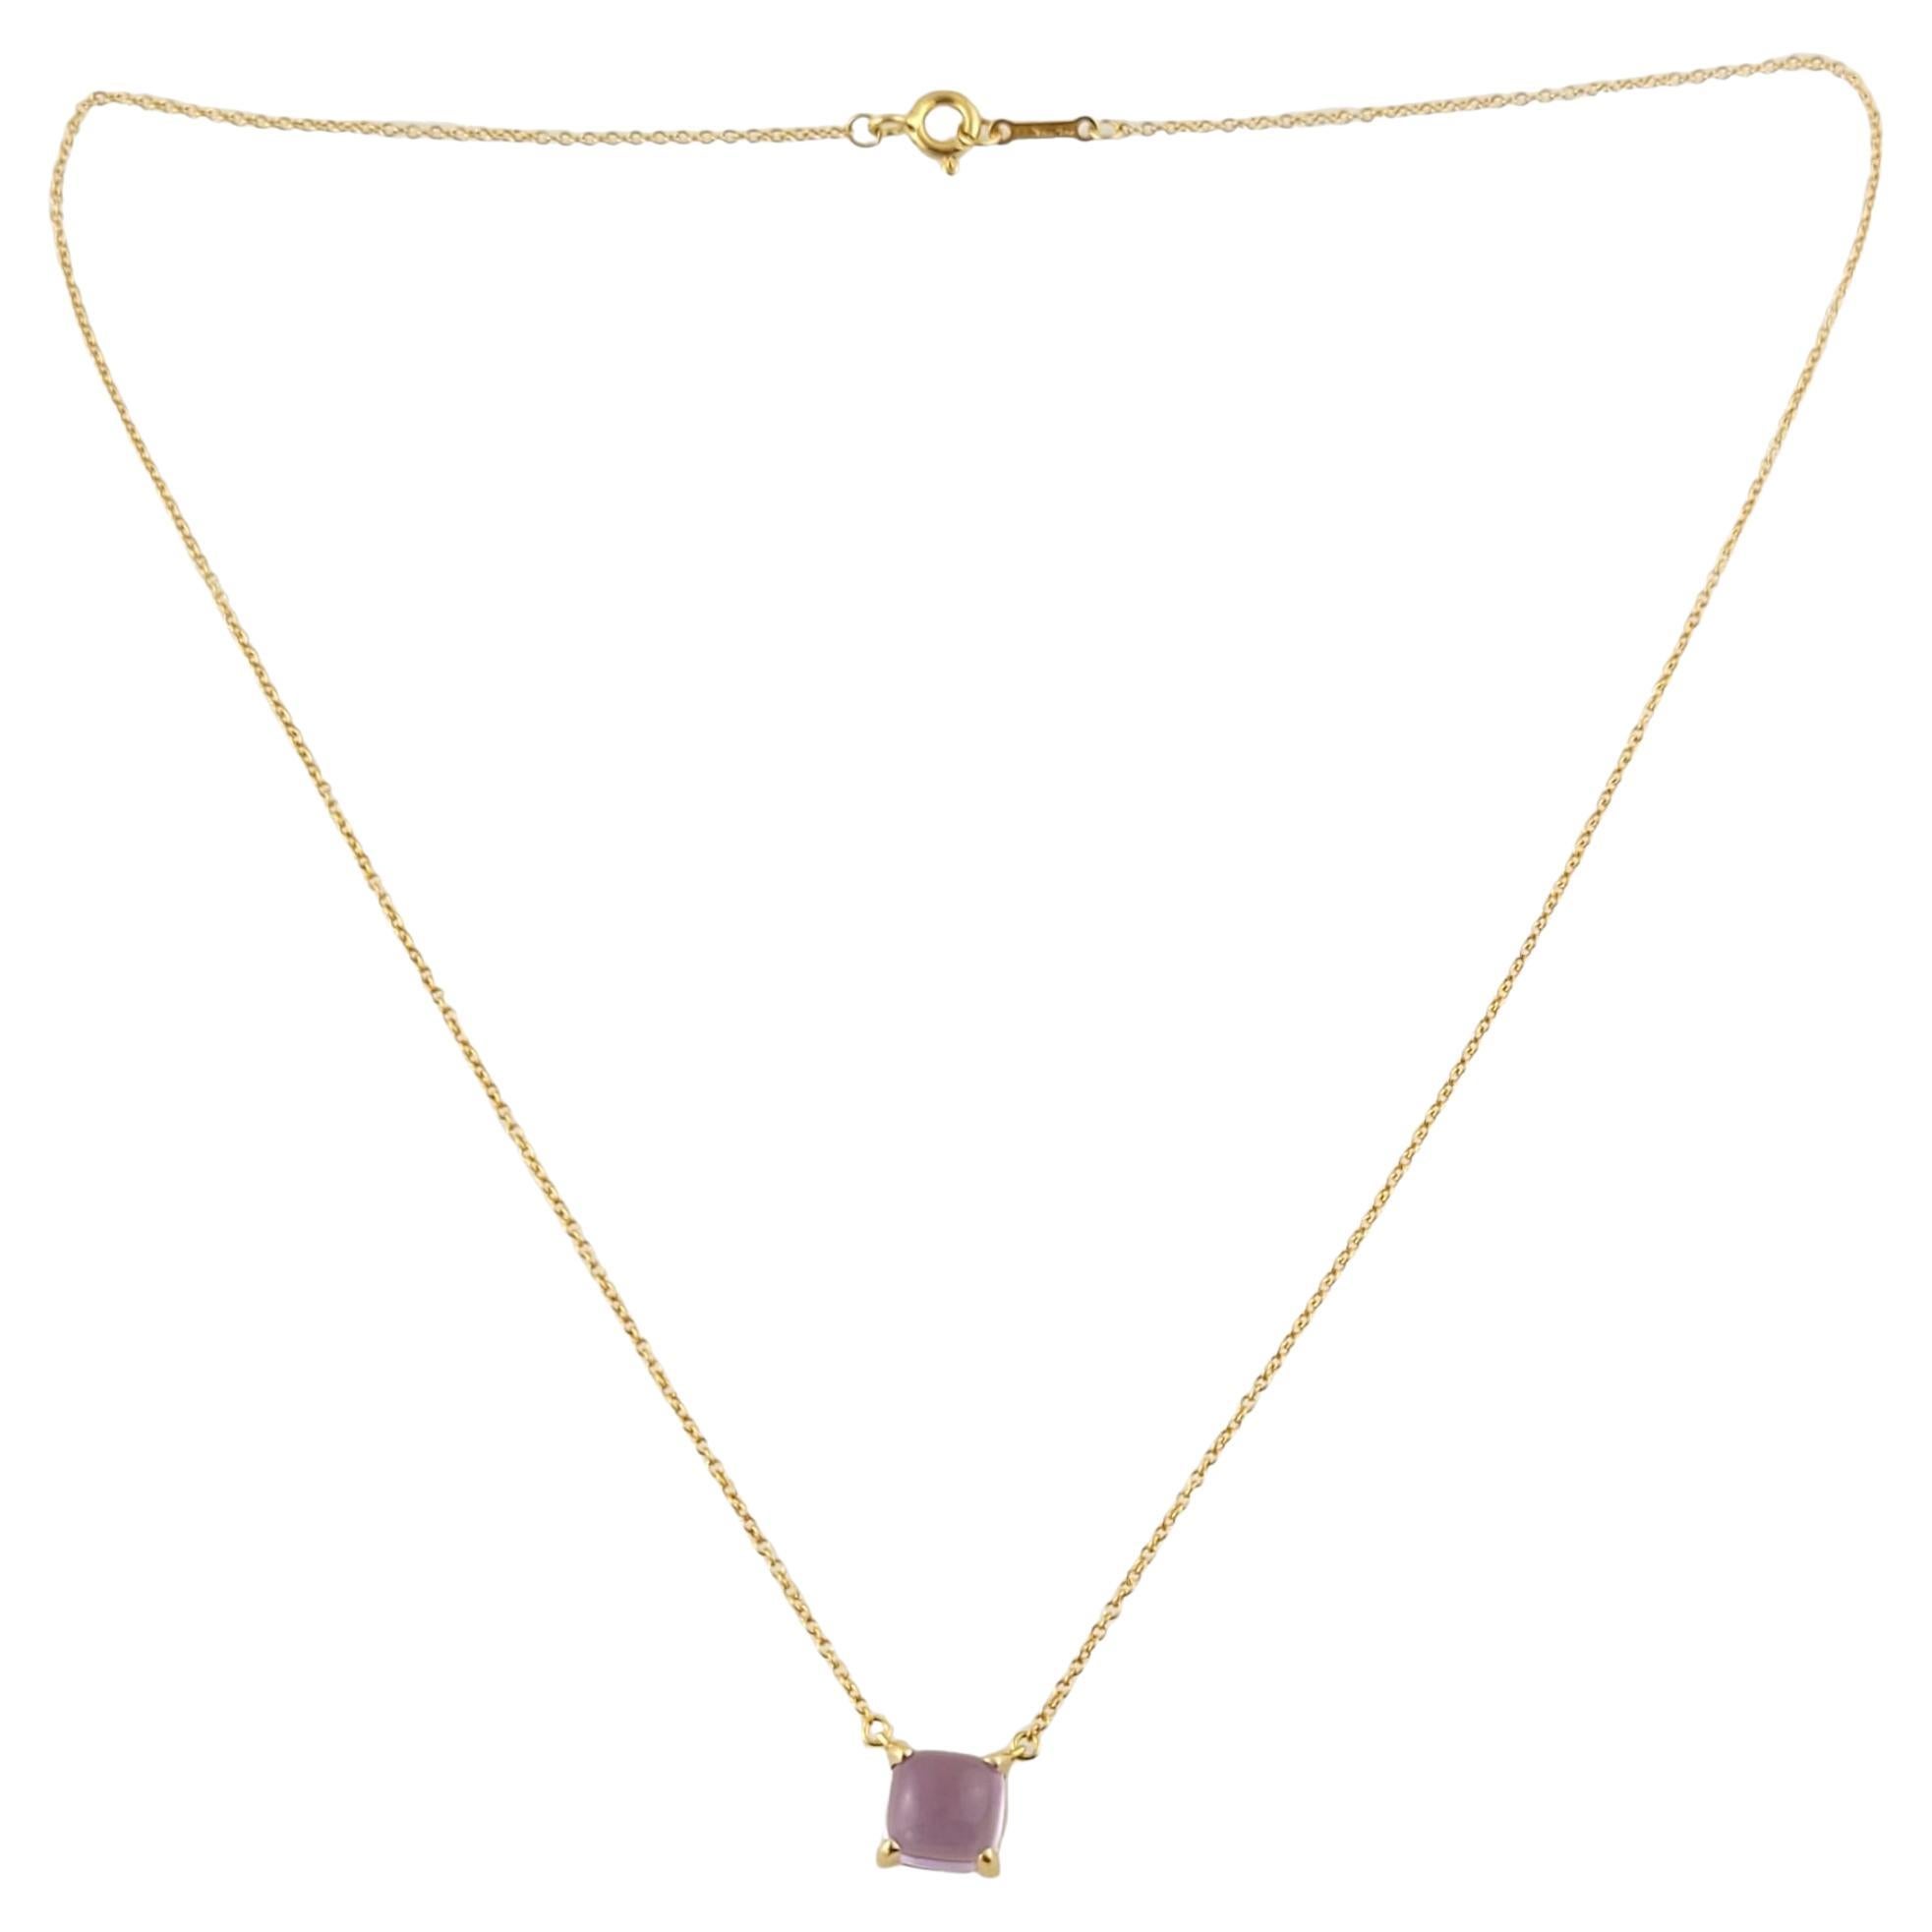 Tiffany & Co. Paloma Picasso 18k Yellow Gold Amethyst Sugar Stack Necklace